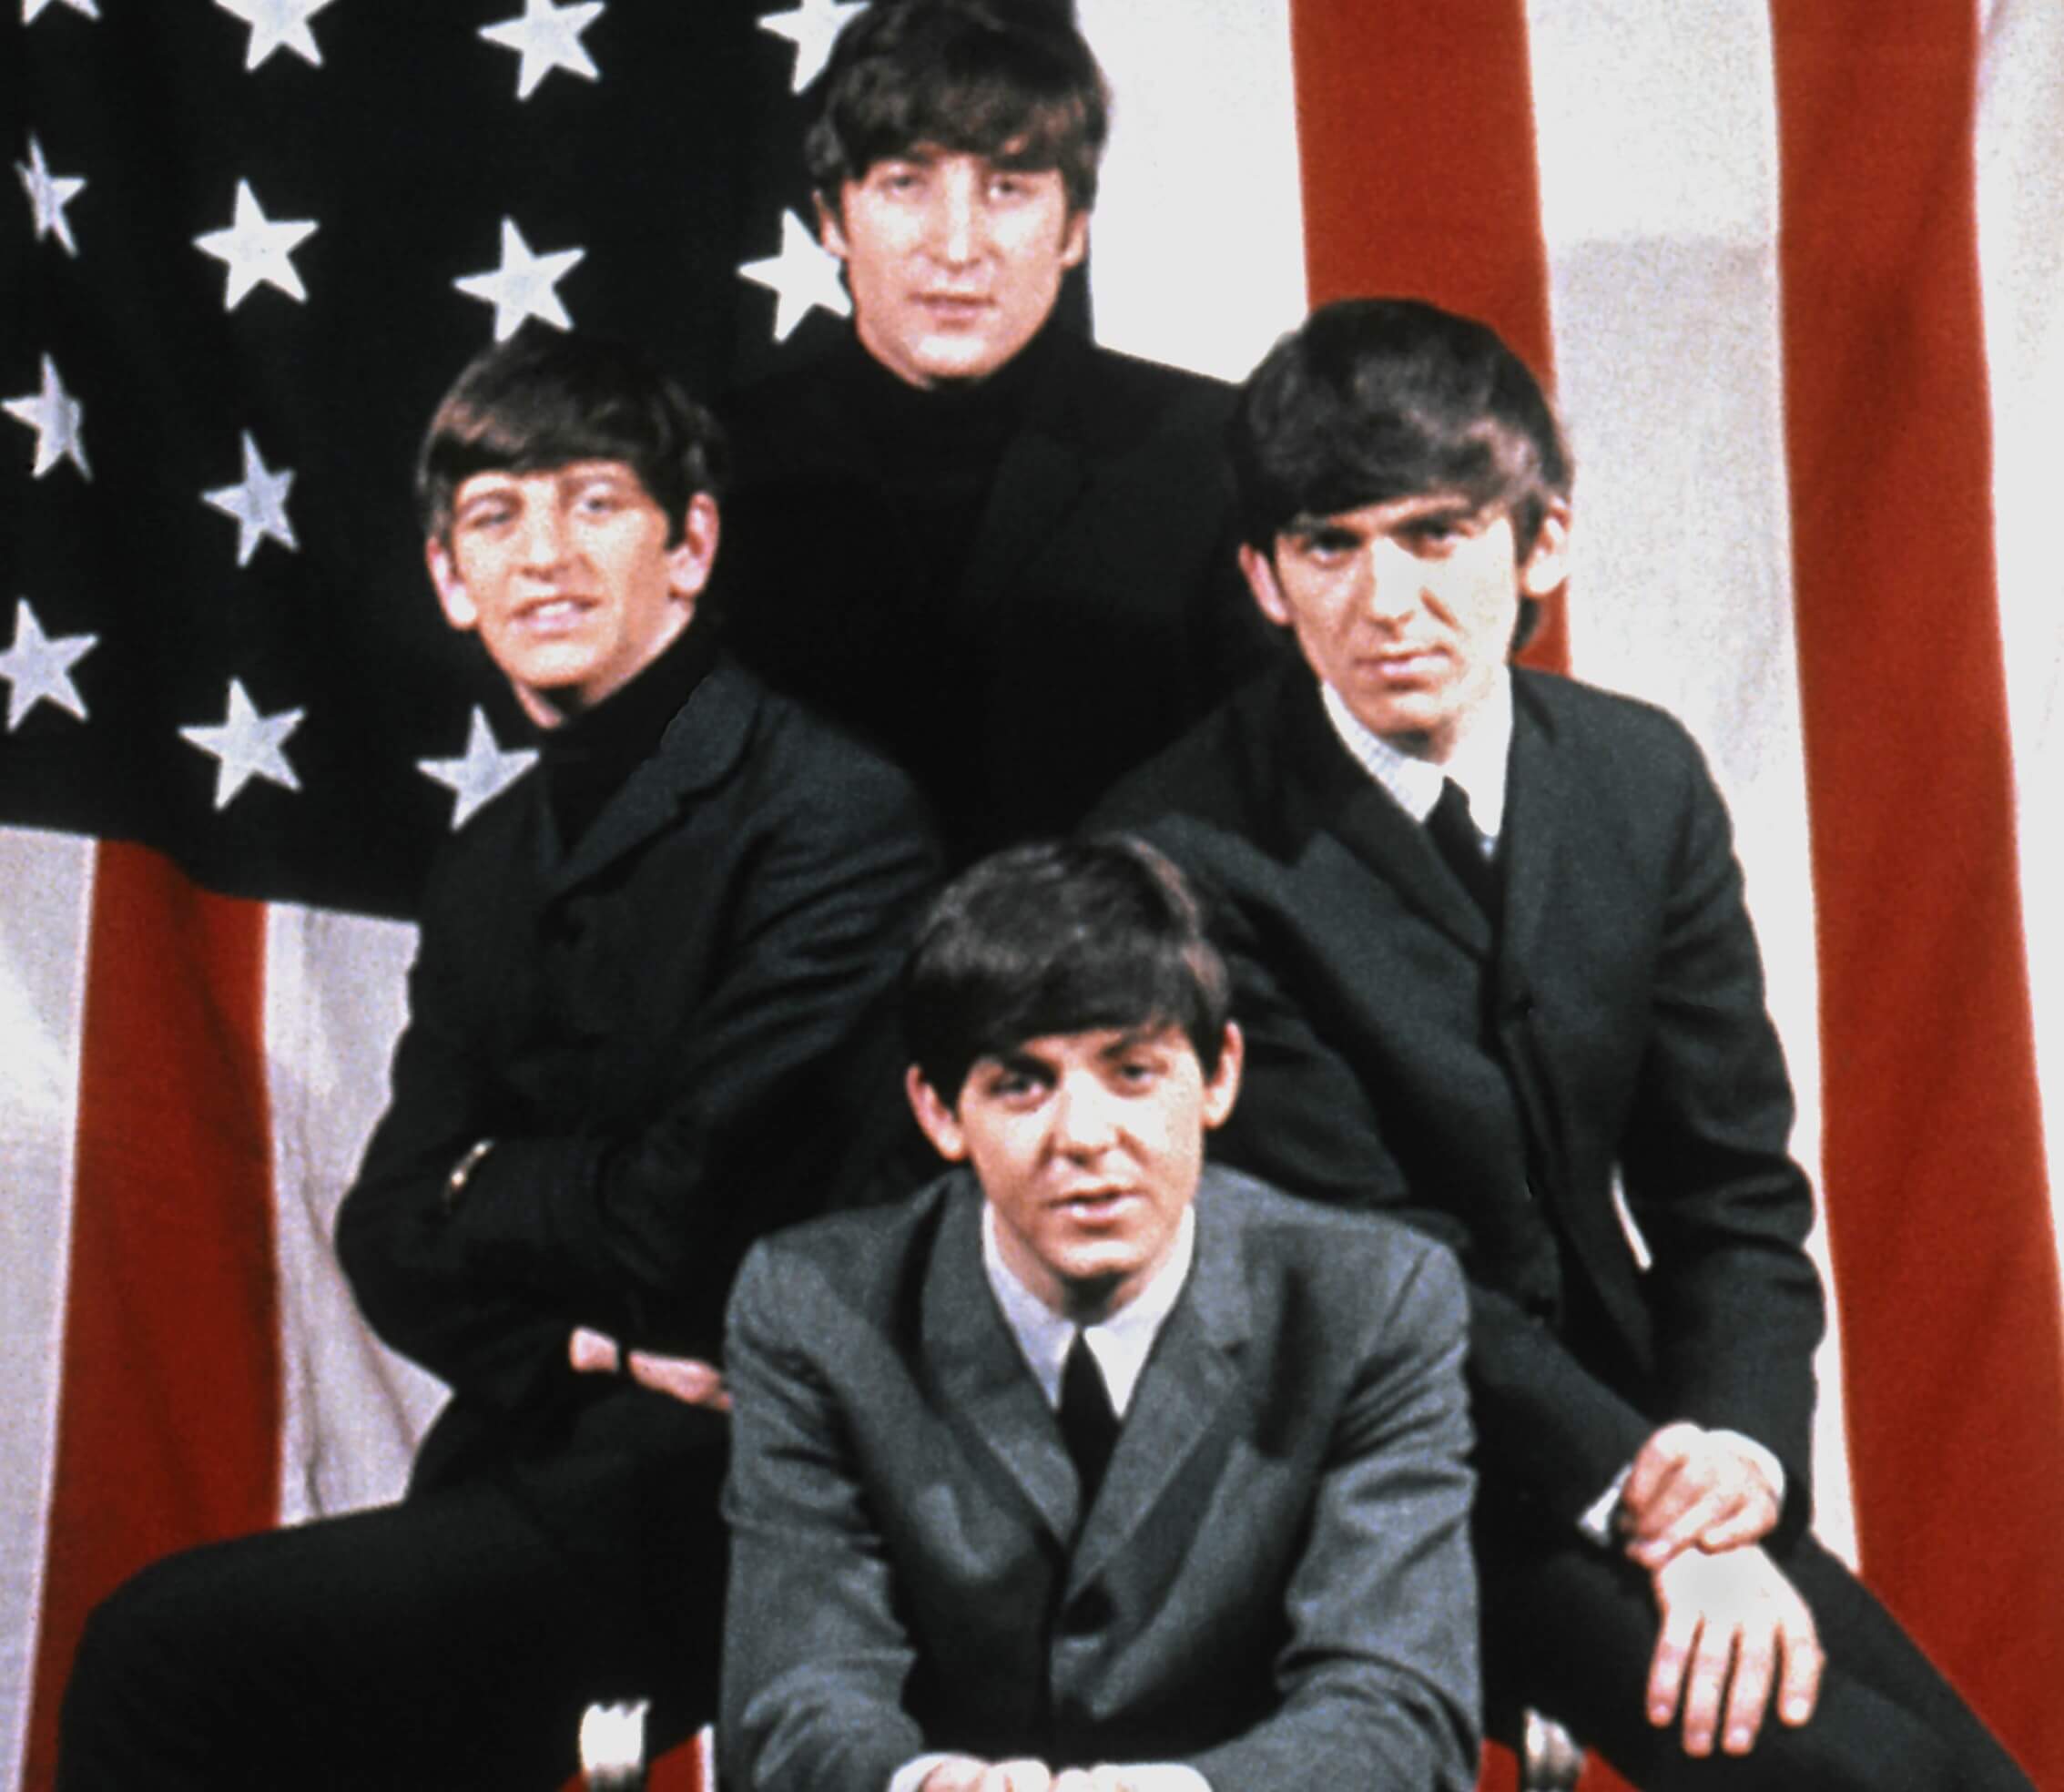 The Beatles in front of an American flag